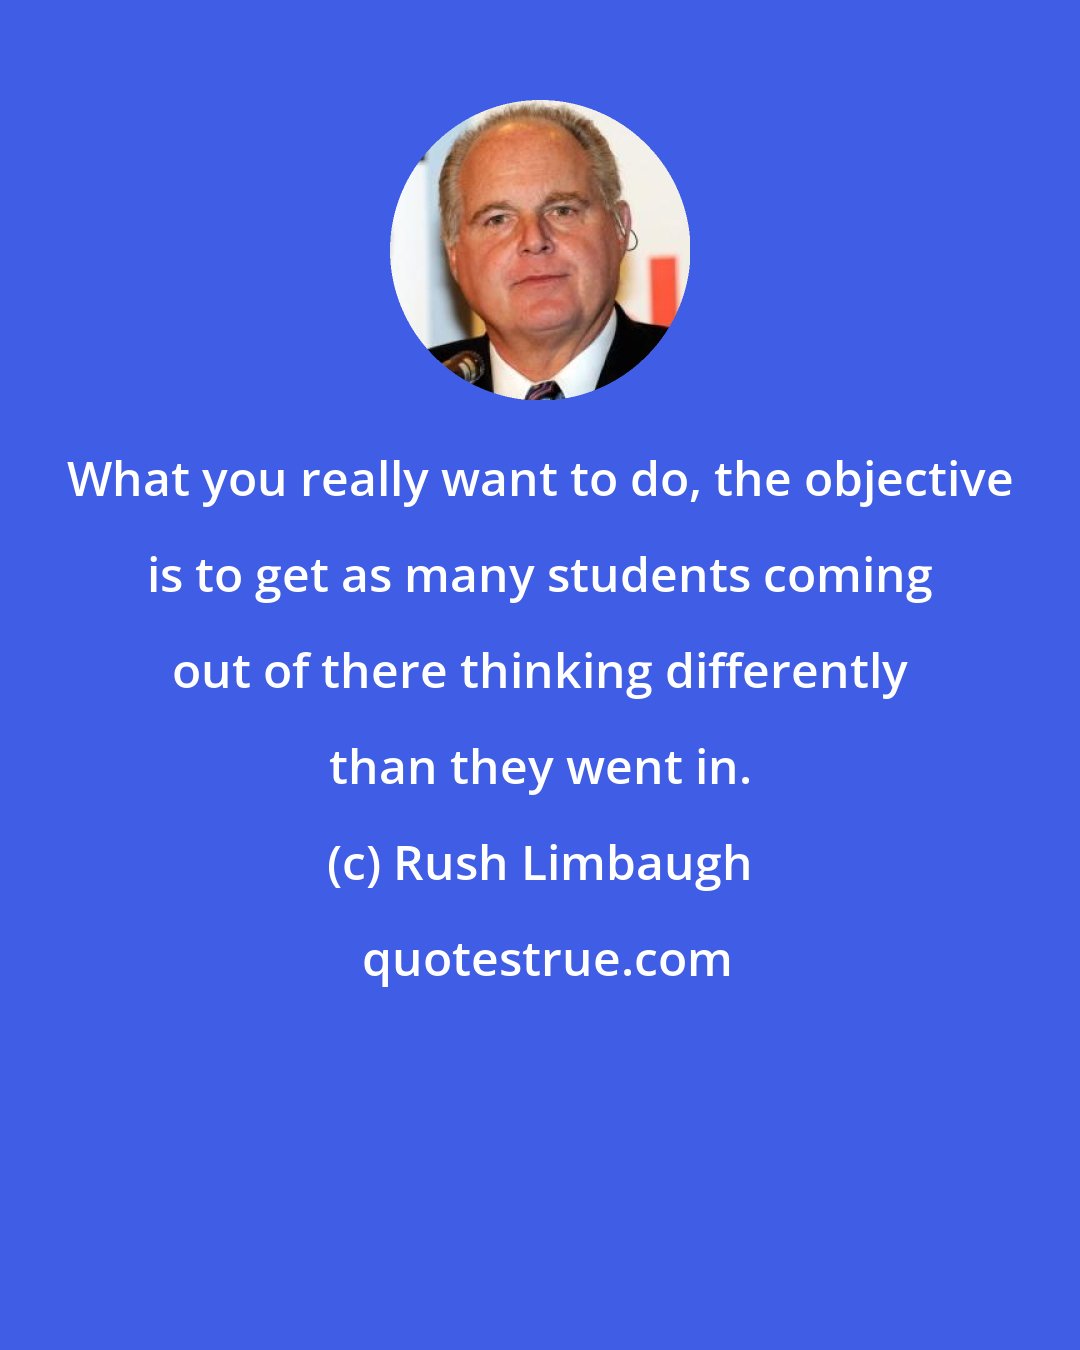 Rush Limbaugh: What you really want to do, the objective is to get as many students coming out of there thinking differently than they went in.